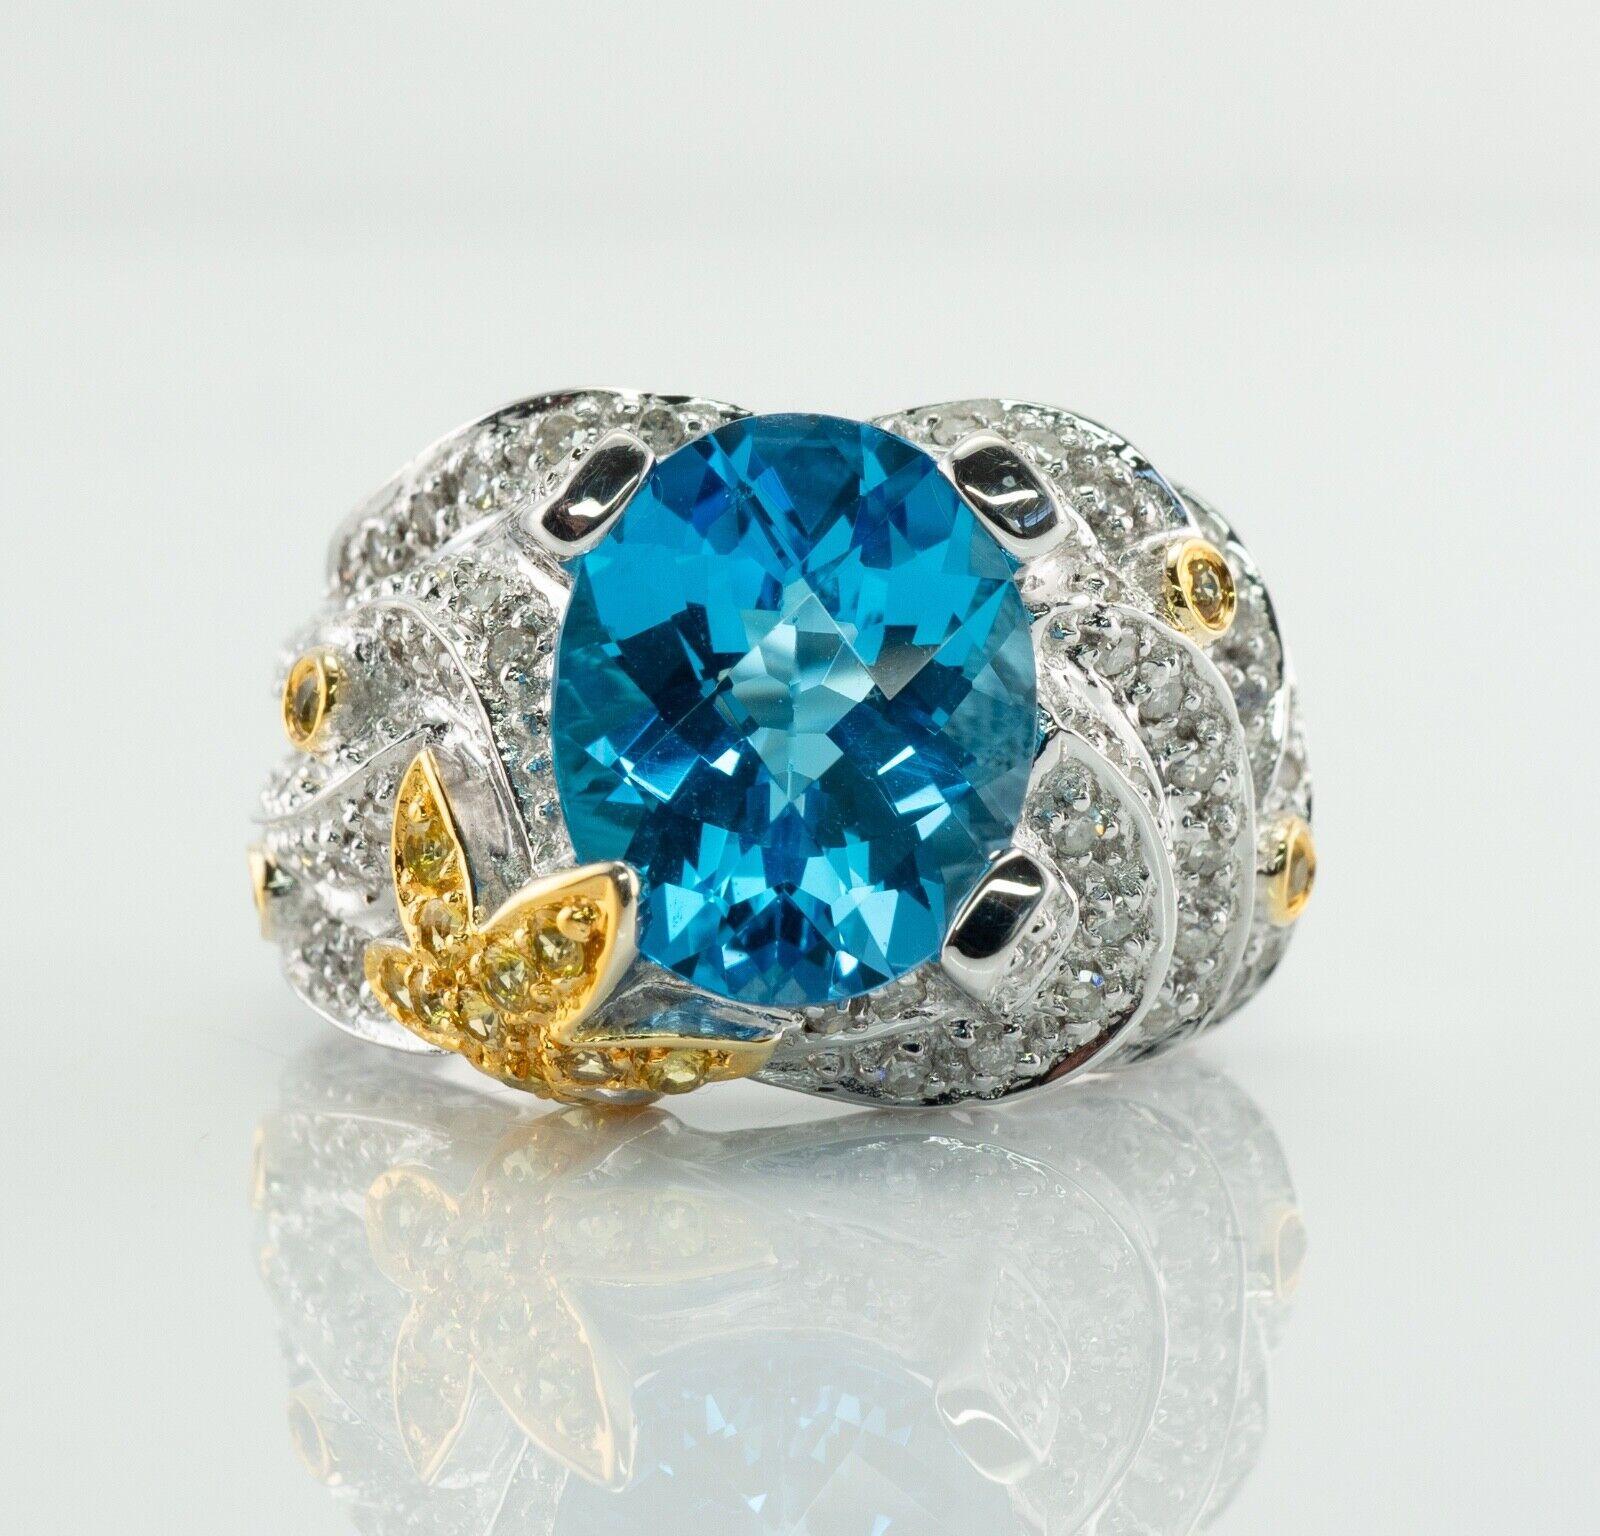 Diamond Blue Topaz Ring 14K White Gold Cocktail

This showstopper estate ring is crafted in solid 14K White Gold. The center natural checkerboard blue Topaz measures 12x10mm (3.50 cts). This is a very clean and transparent gem of great intensity.